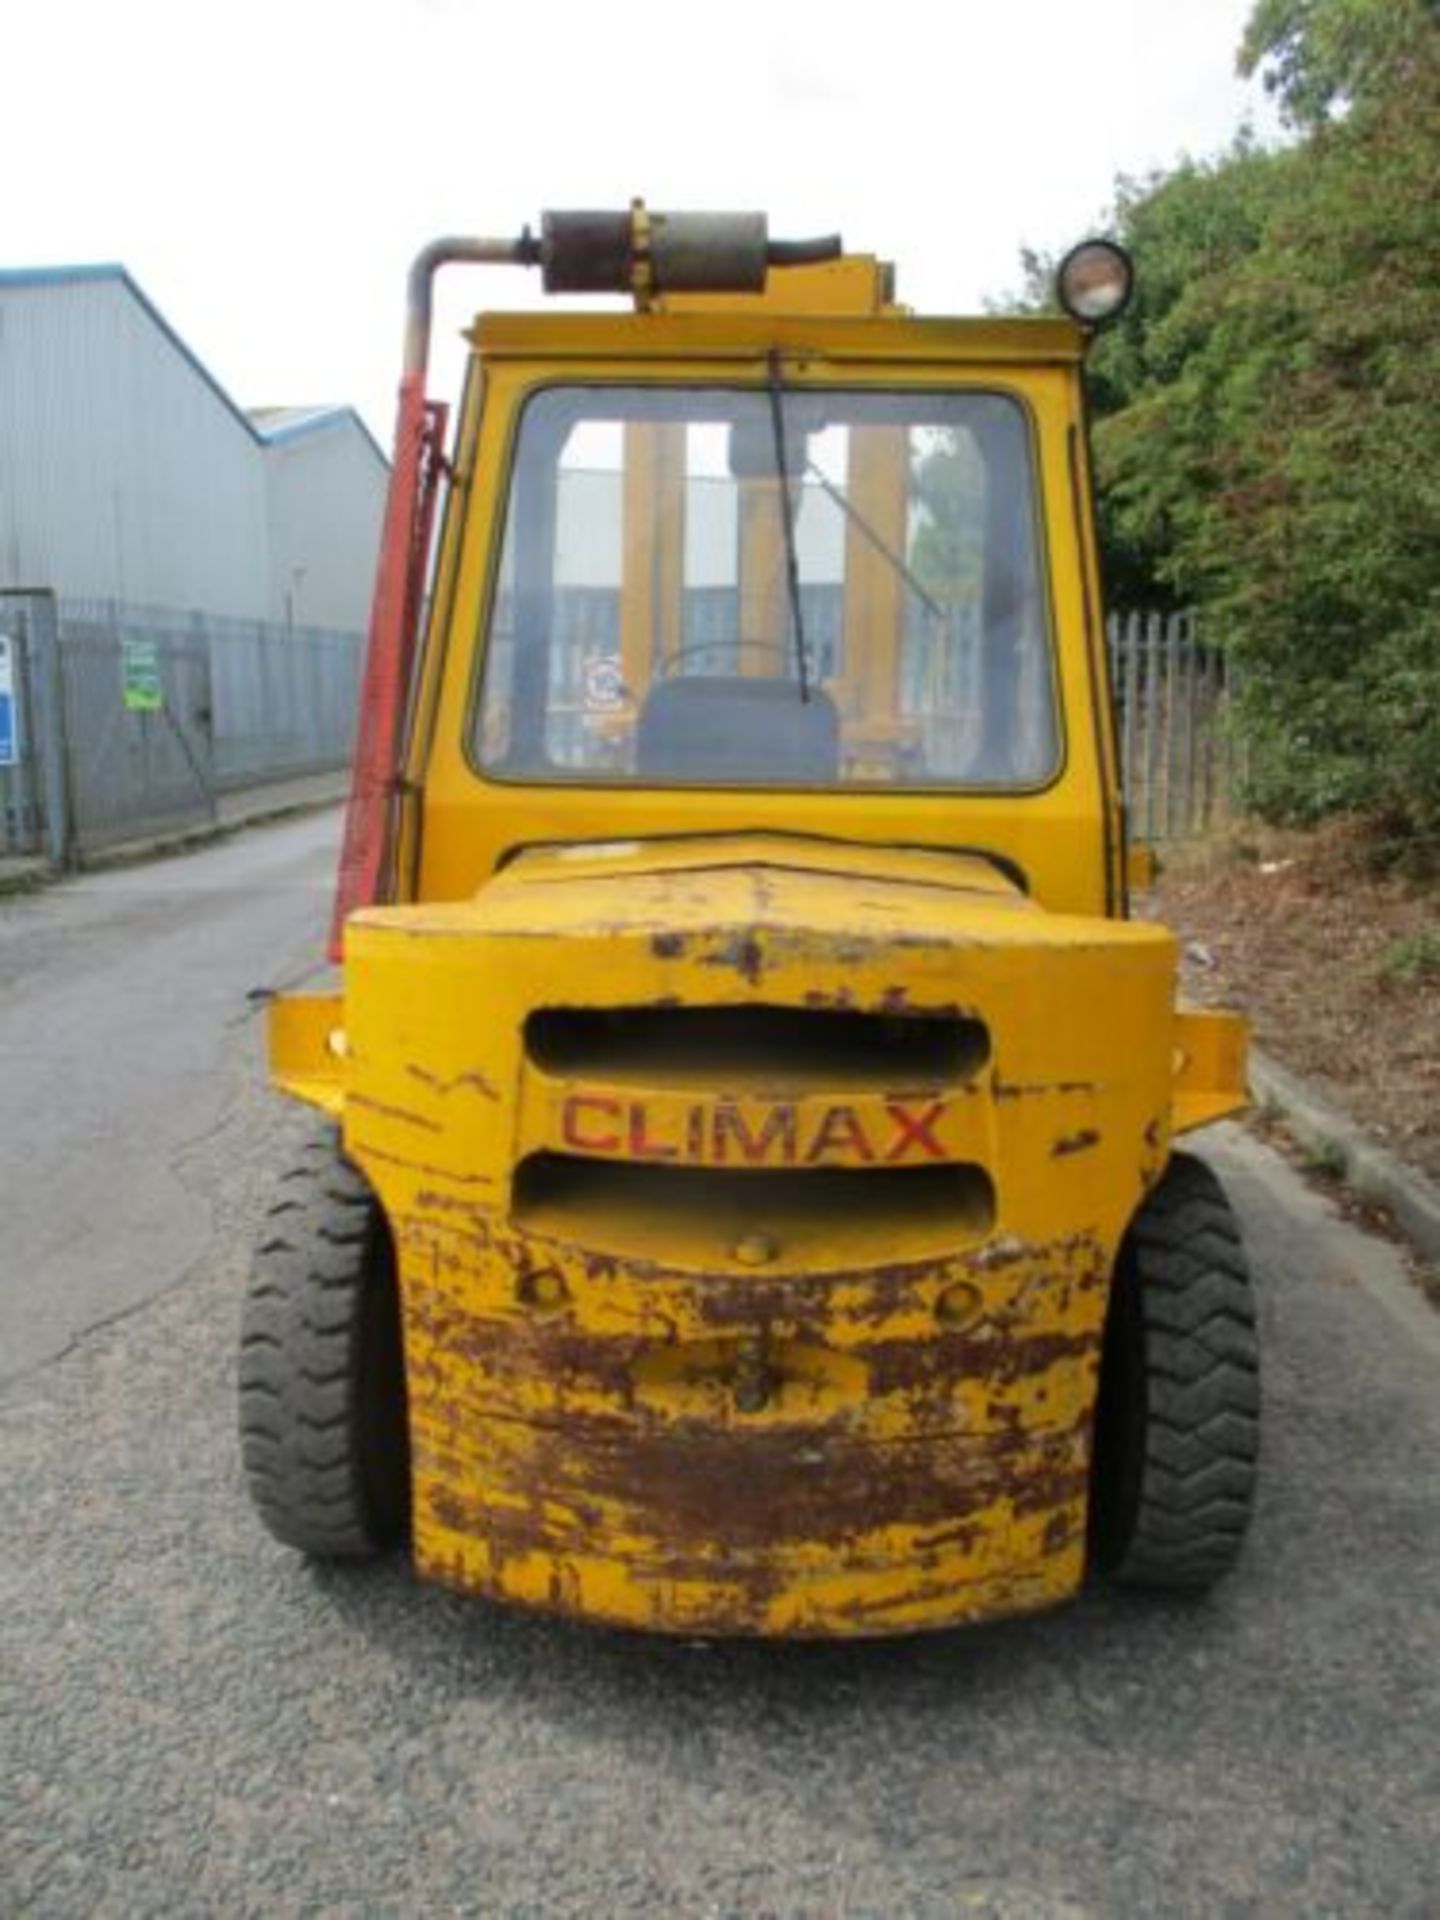 CLIMAX DA50 FORK LIFT FORKLIFT TRUCK STACKER 5 TON LIFT 6 7 8 10 DELIVERY - Image 3 of 12